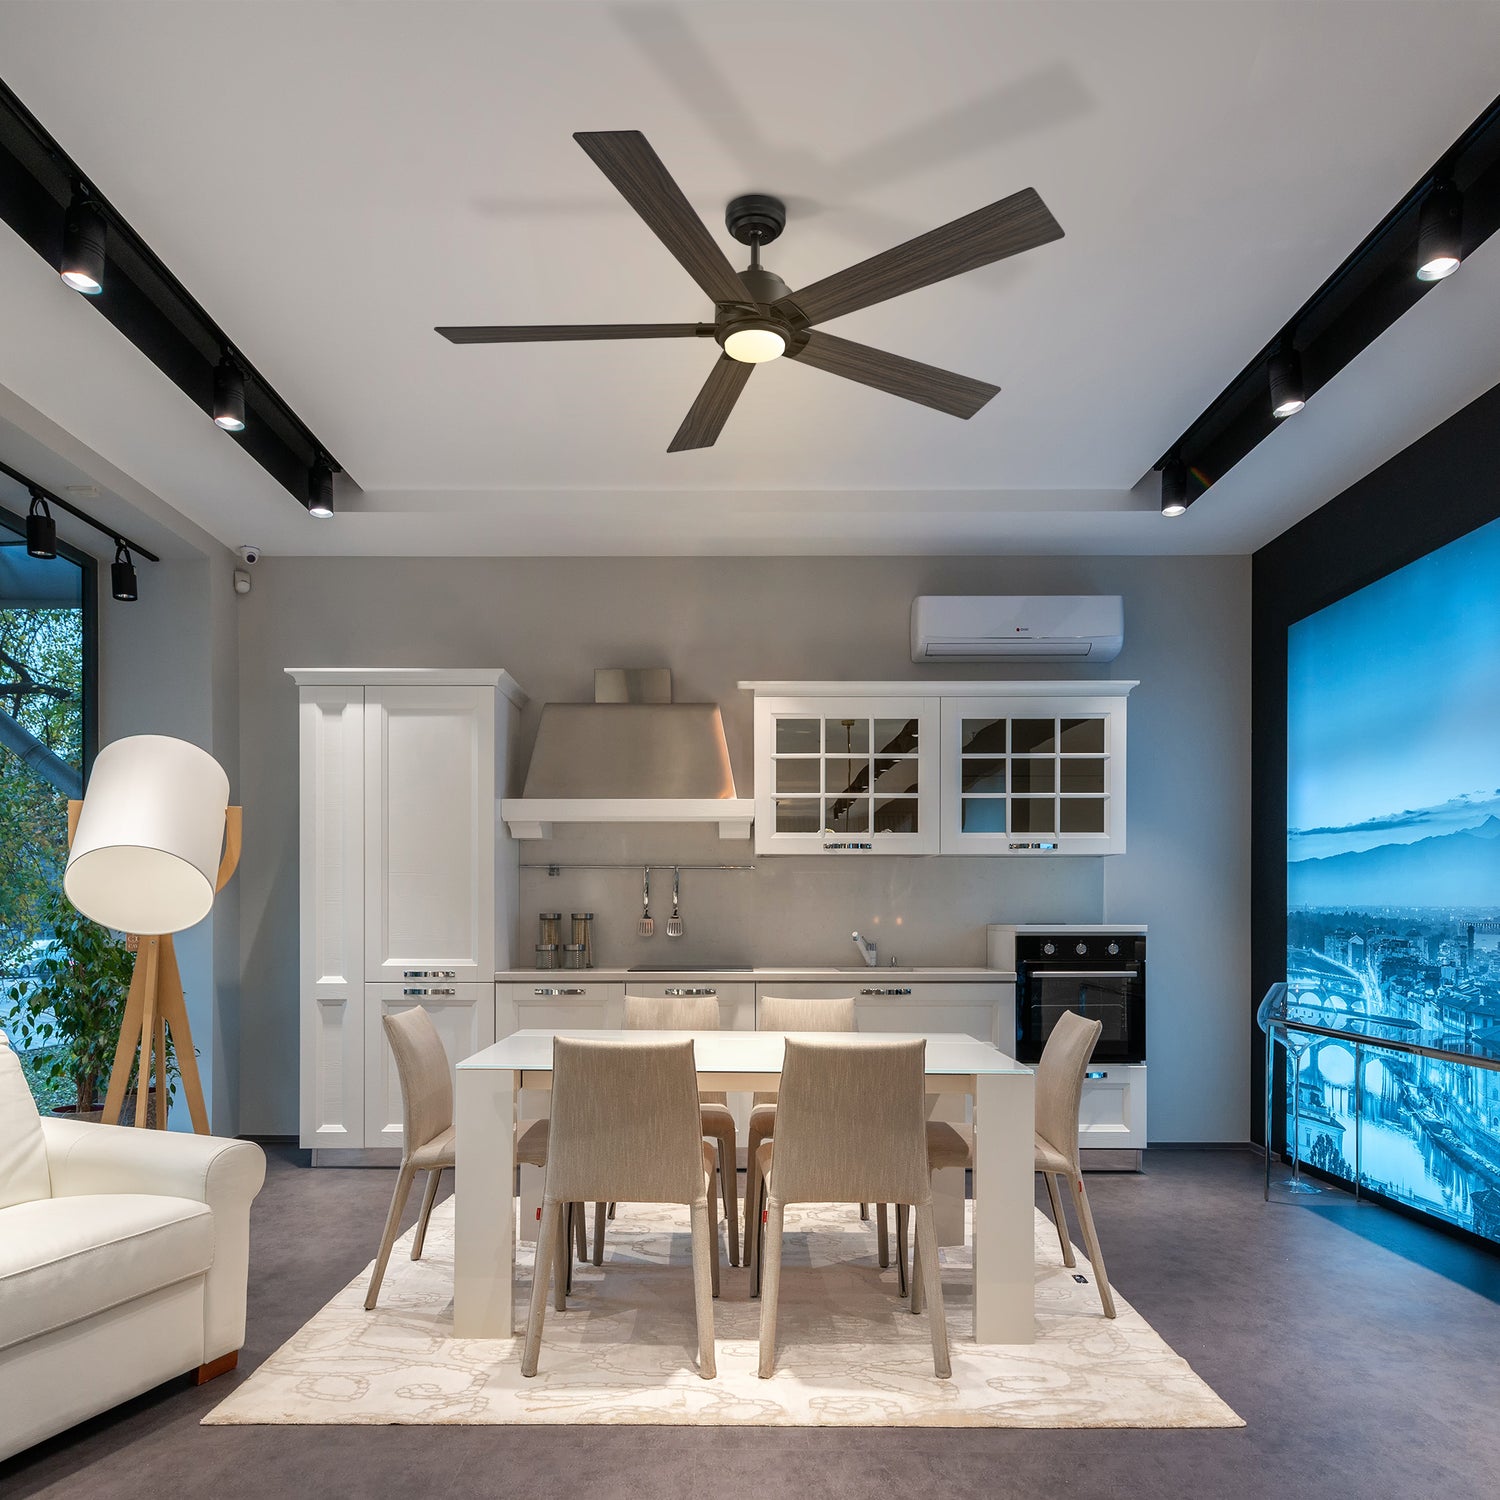 Remote control ceiling fan enhances dining room decor, combining style and functionality for a comfortable dining experience 